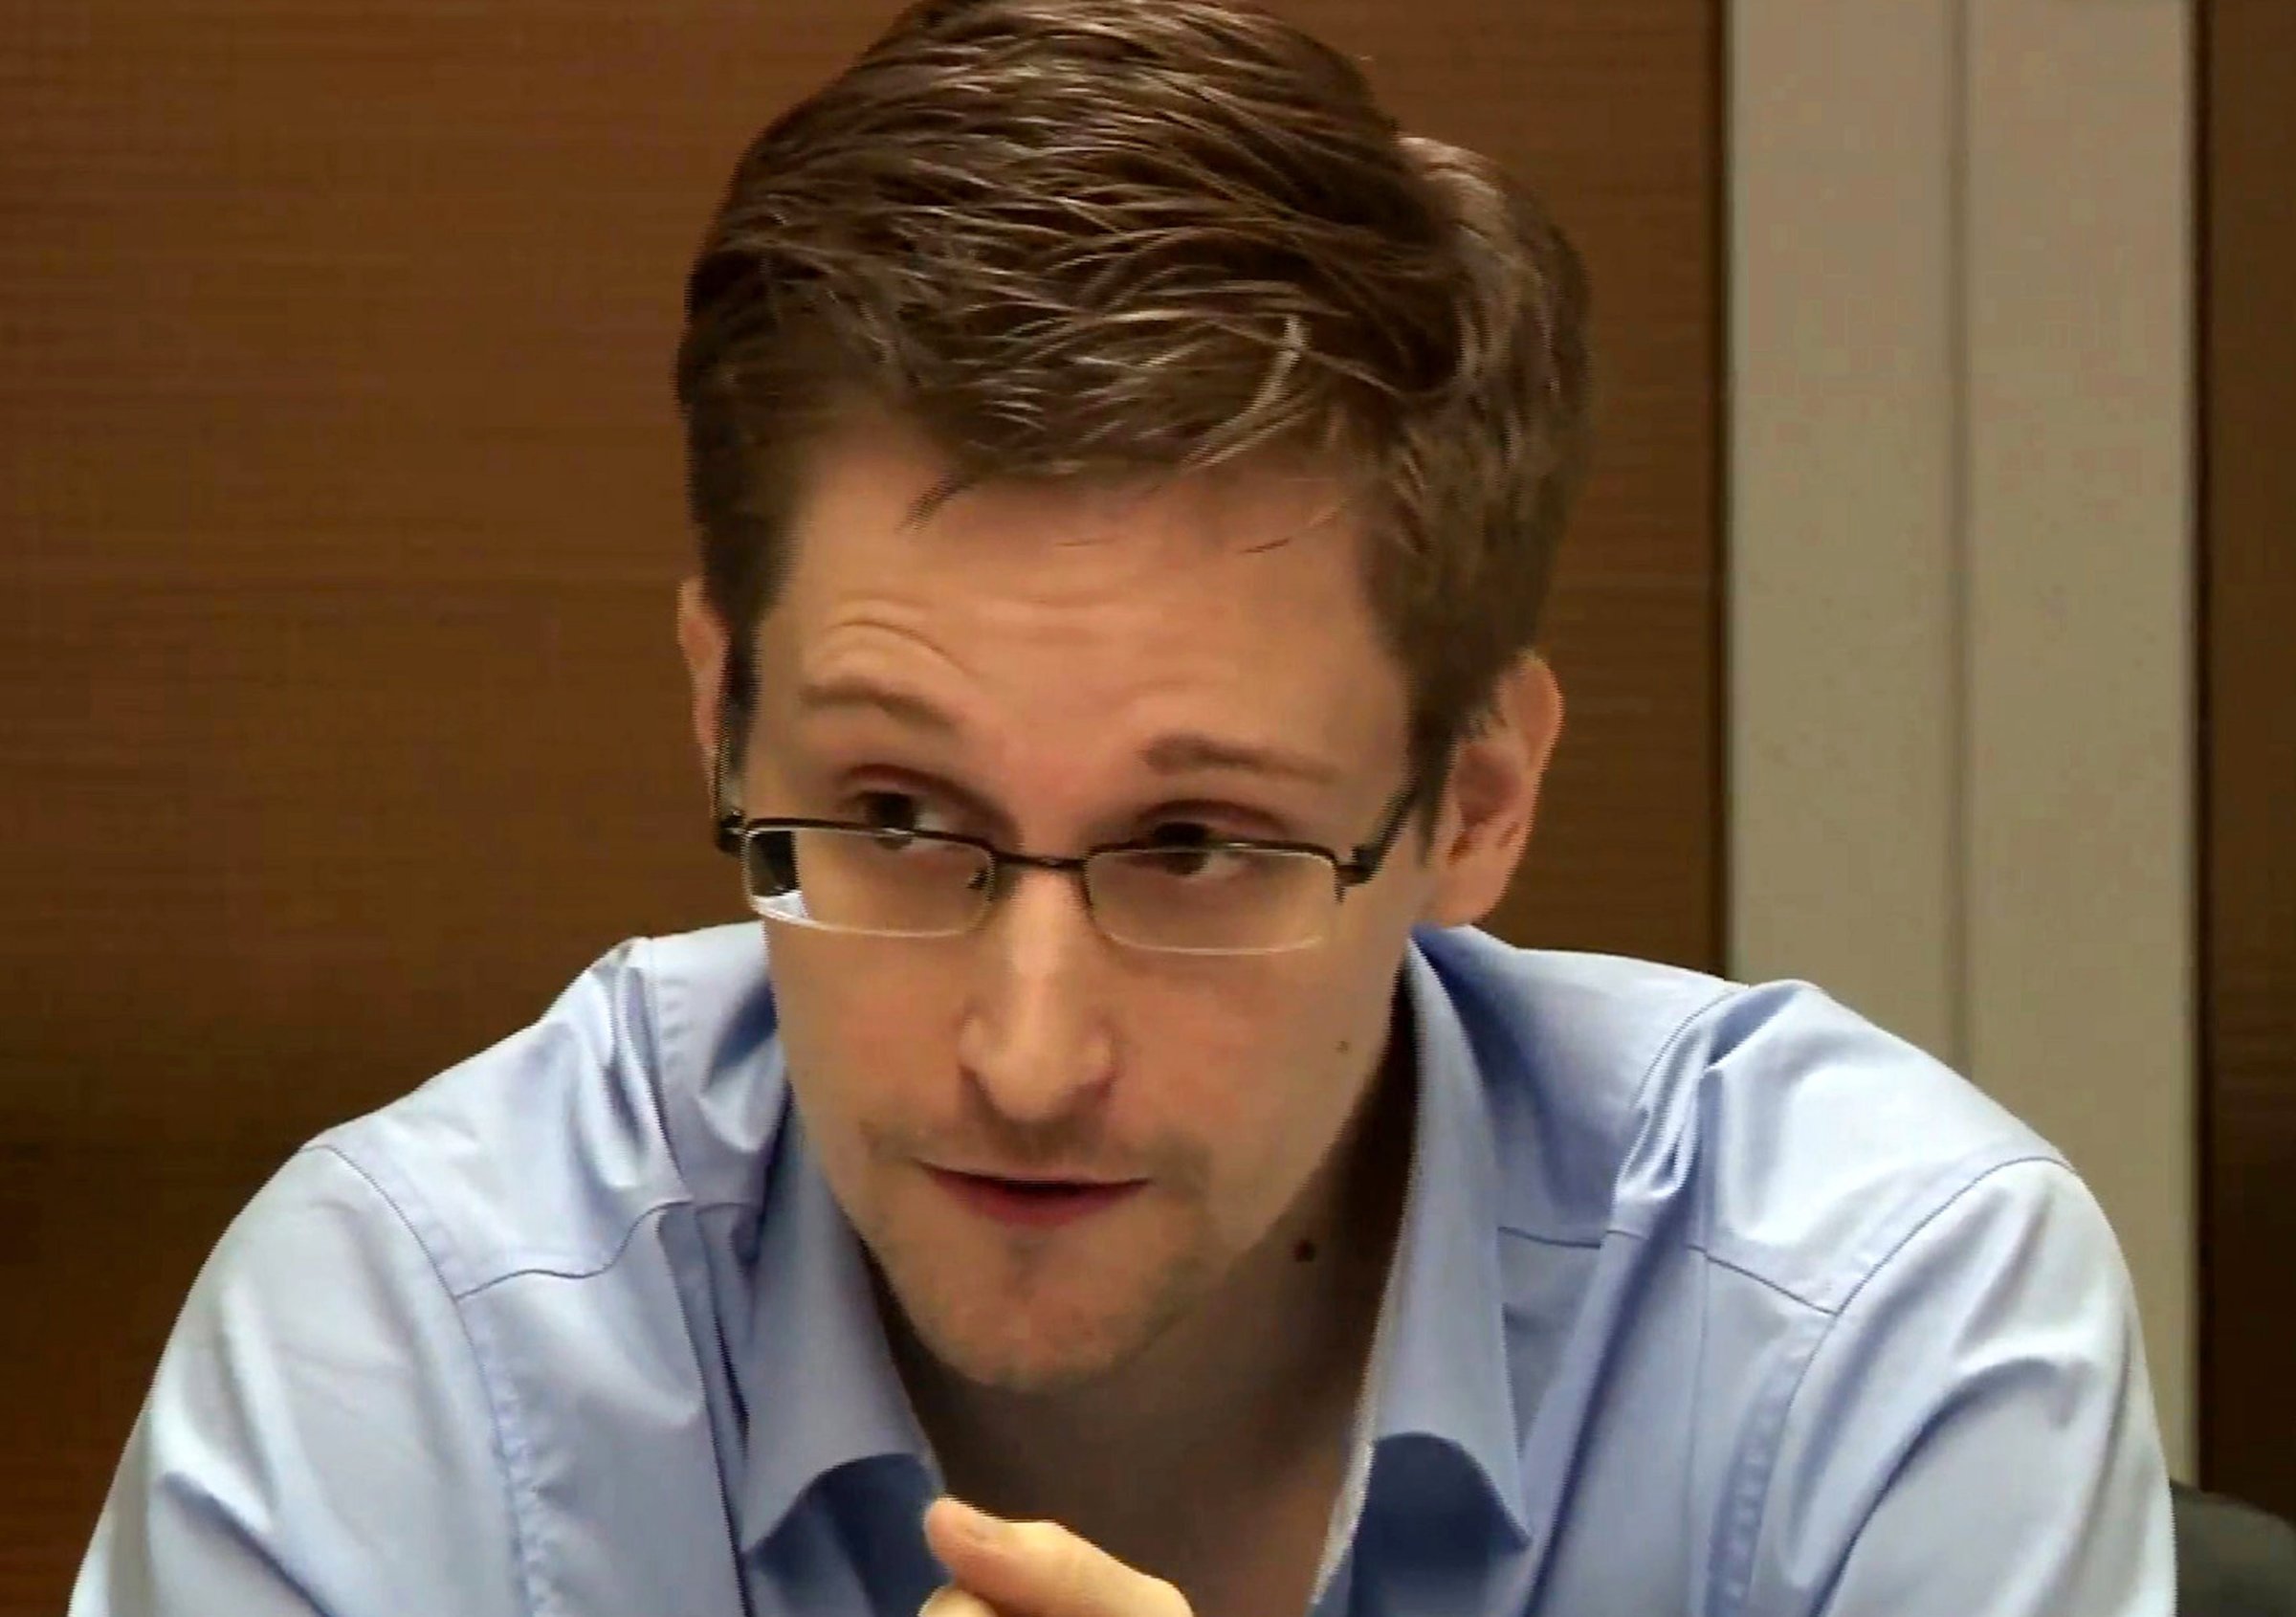 Edward Snowden in Moscow in 2013.